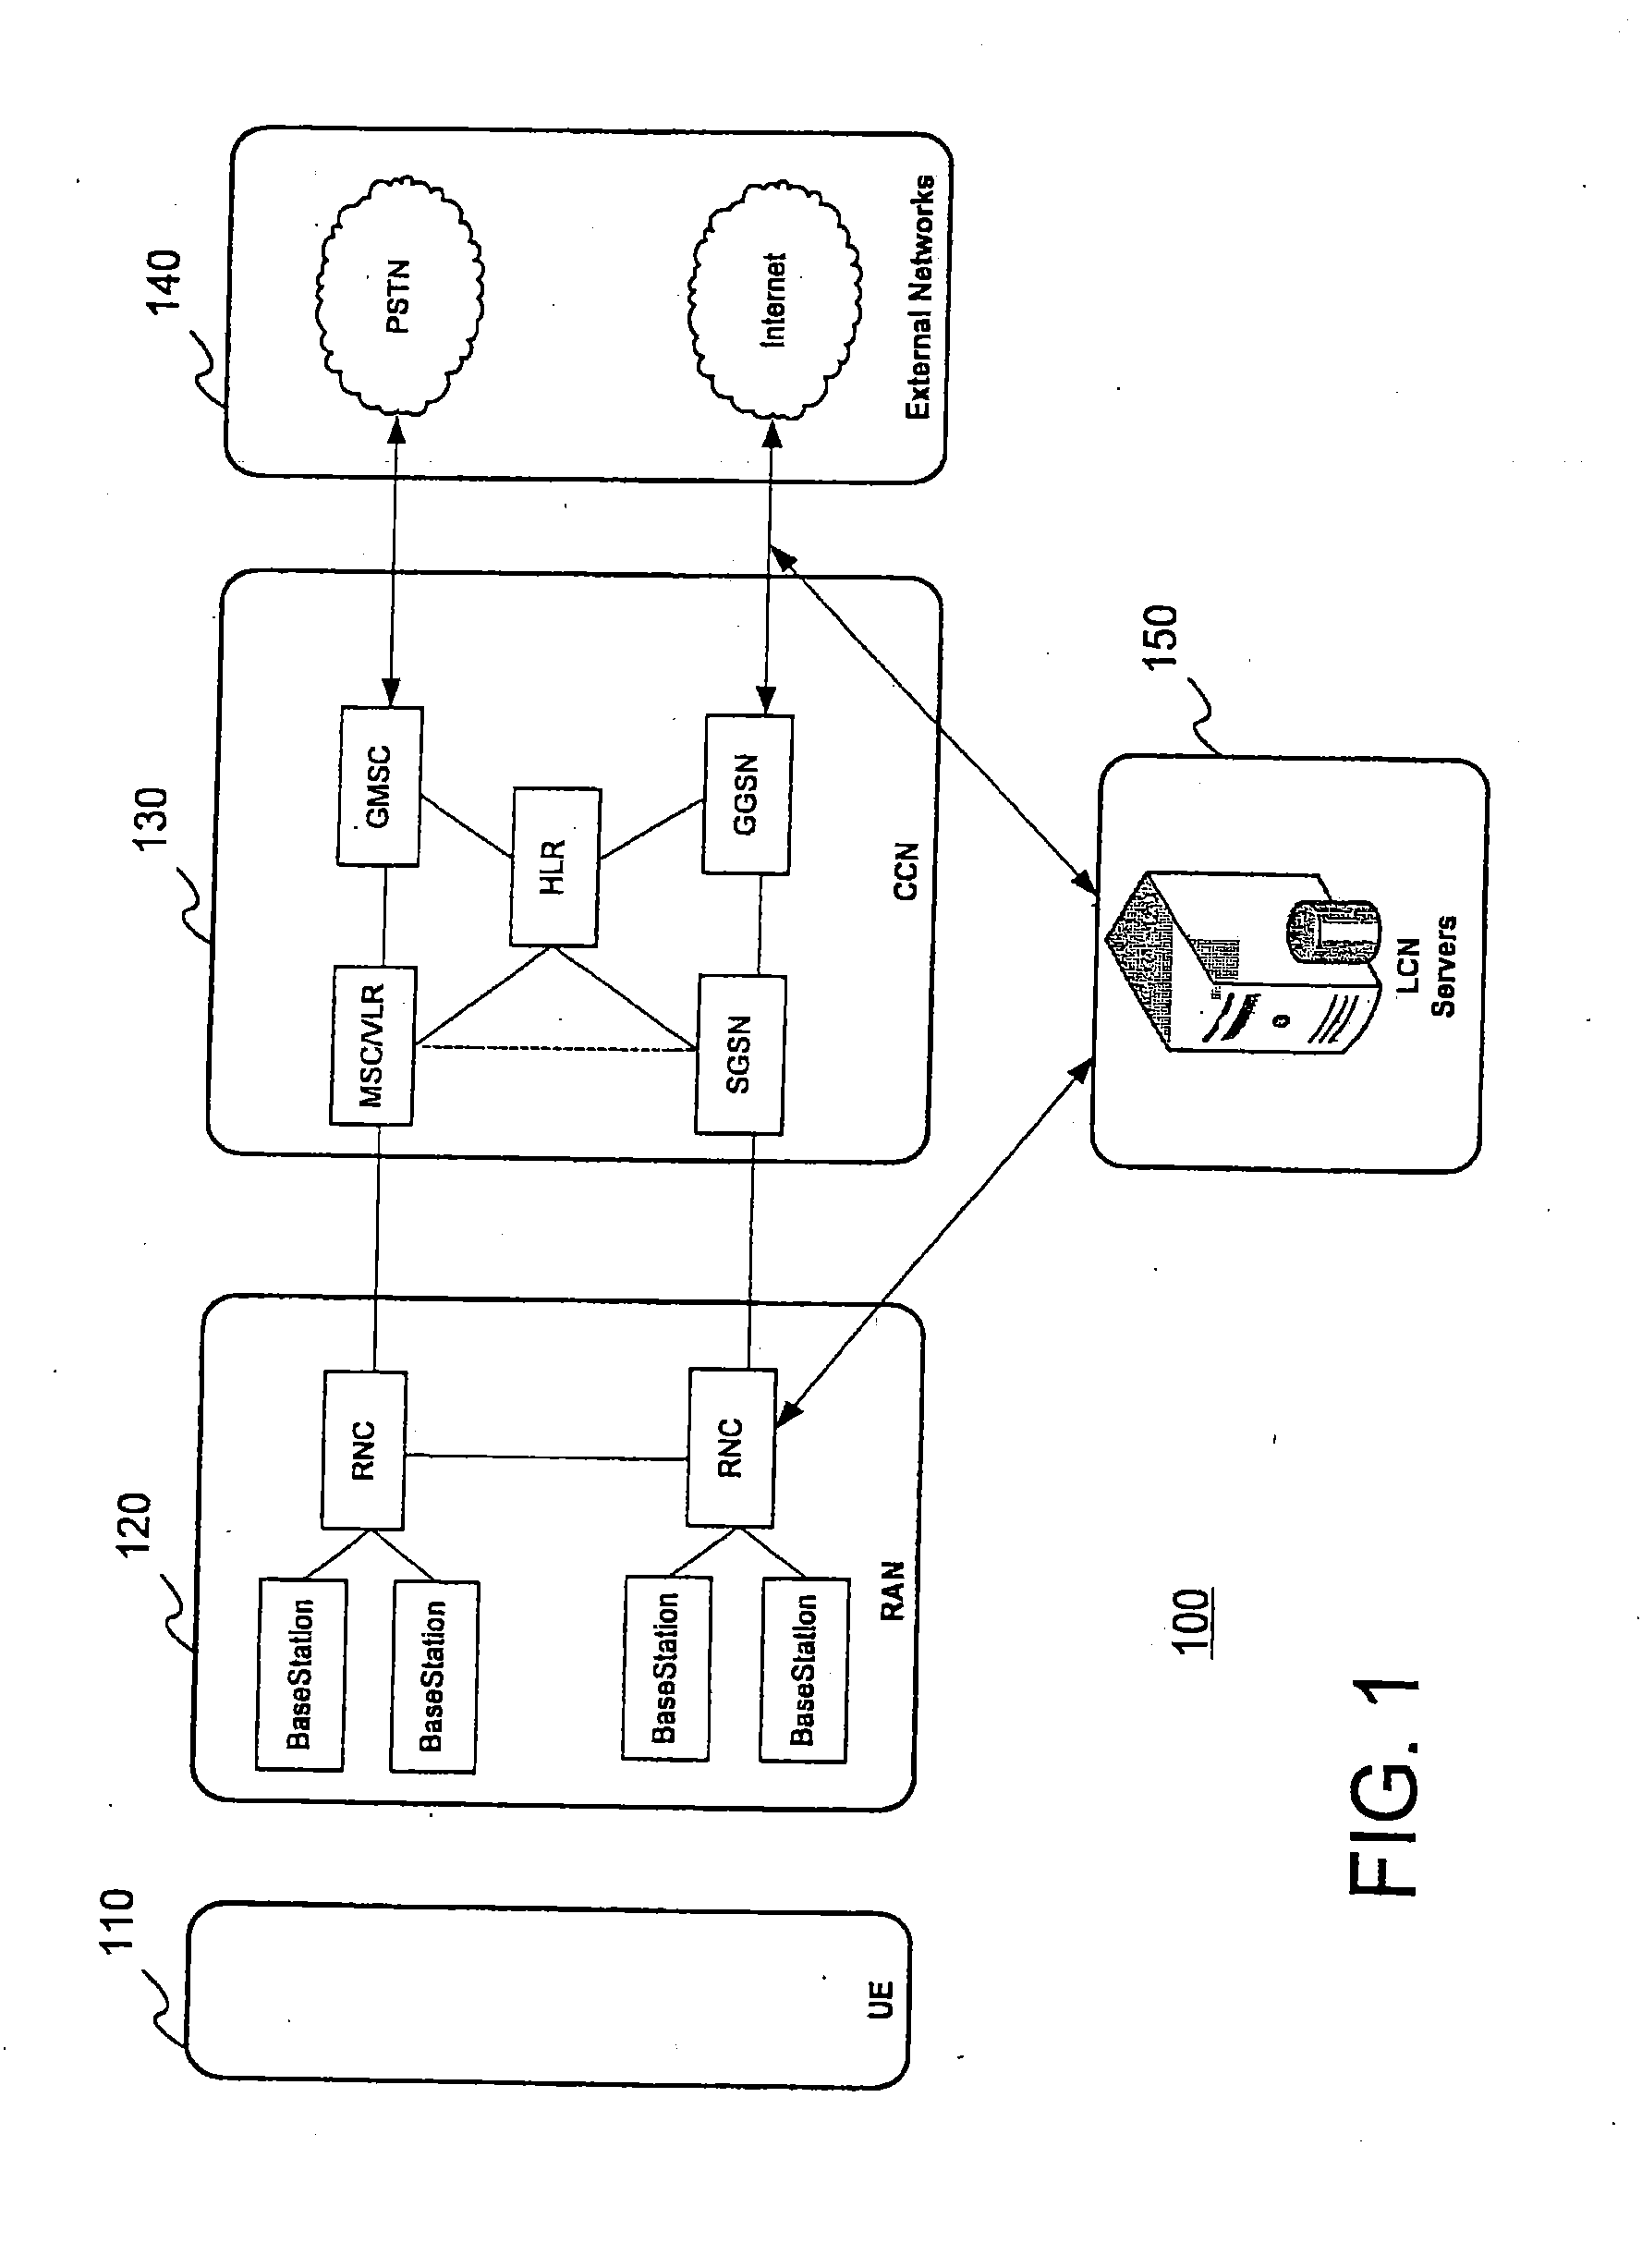 Method and system for efficient communication